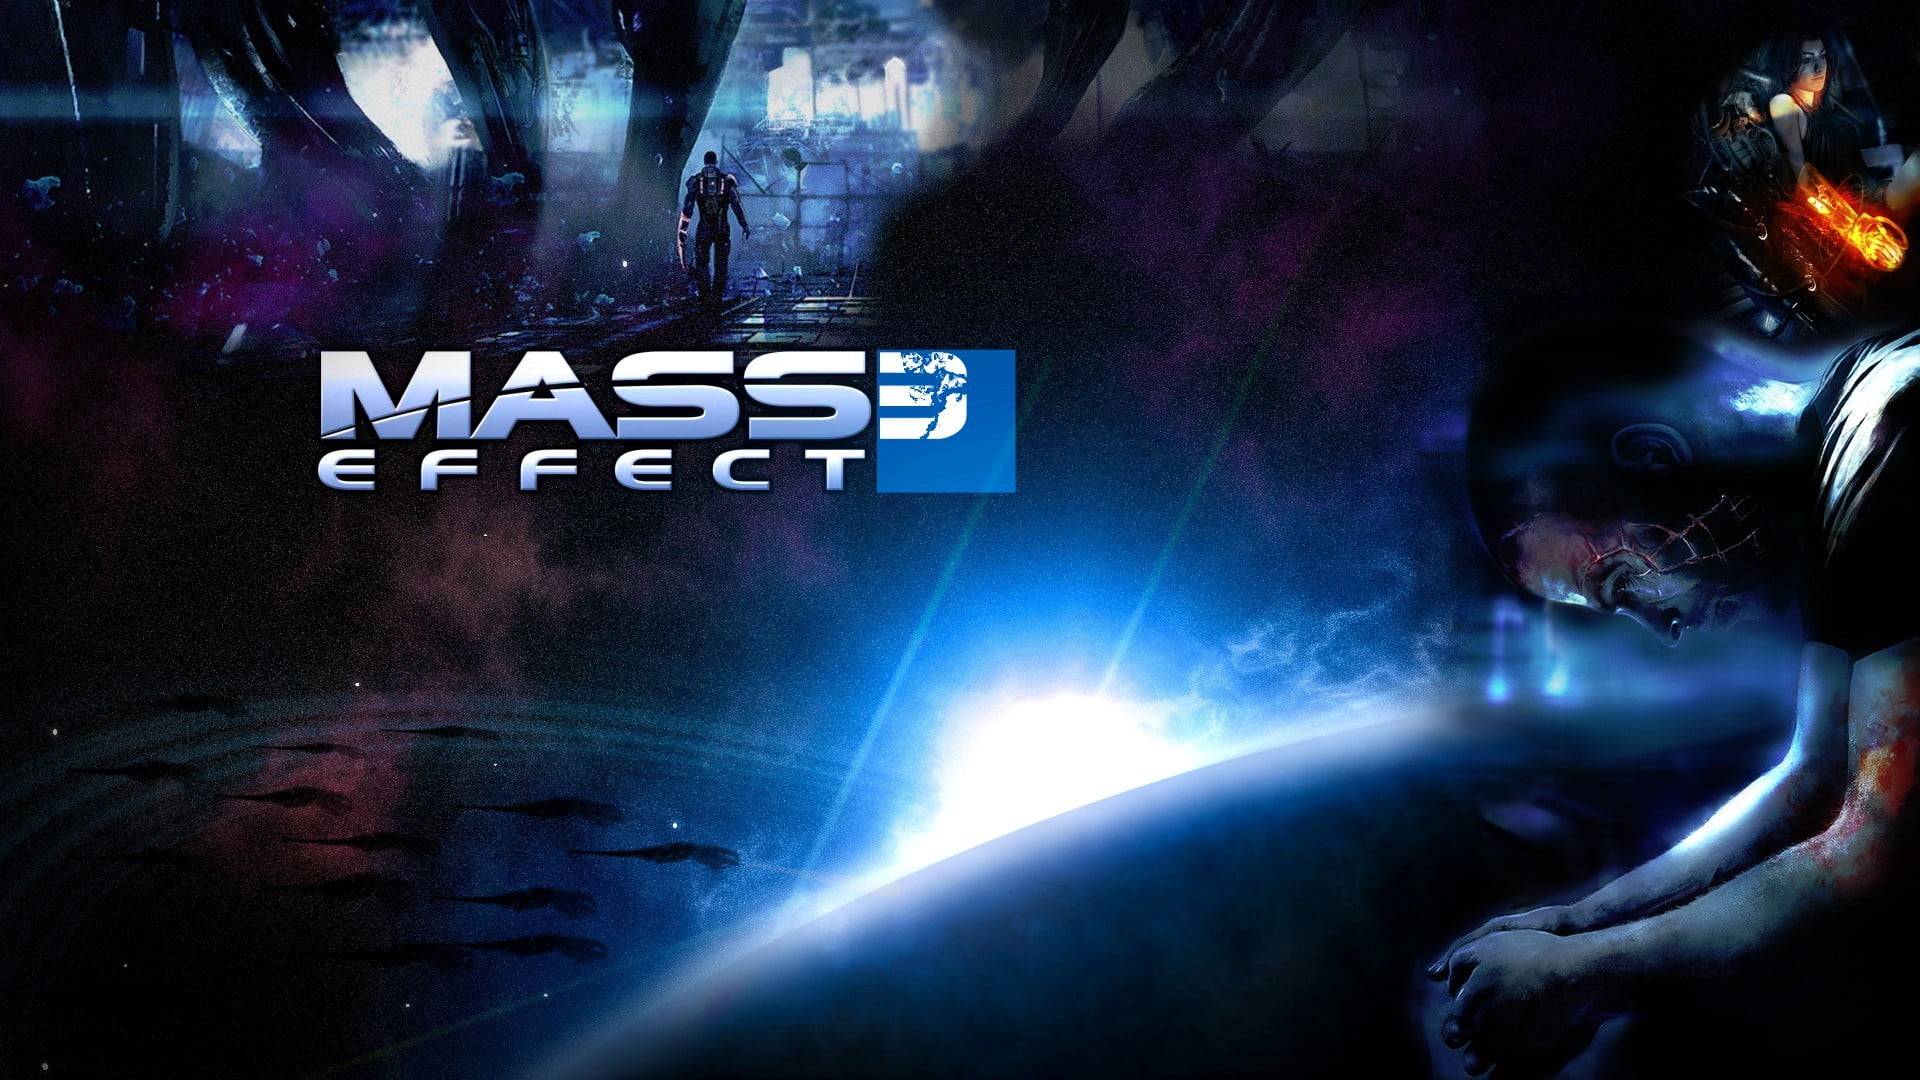 mass effect 3 game save file location